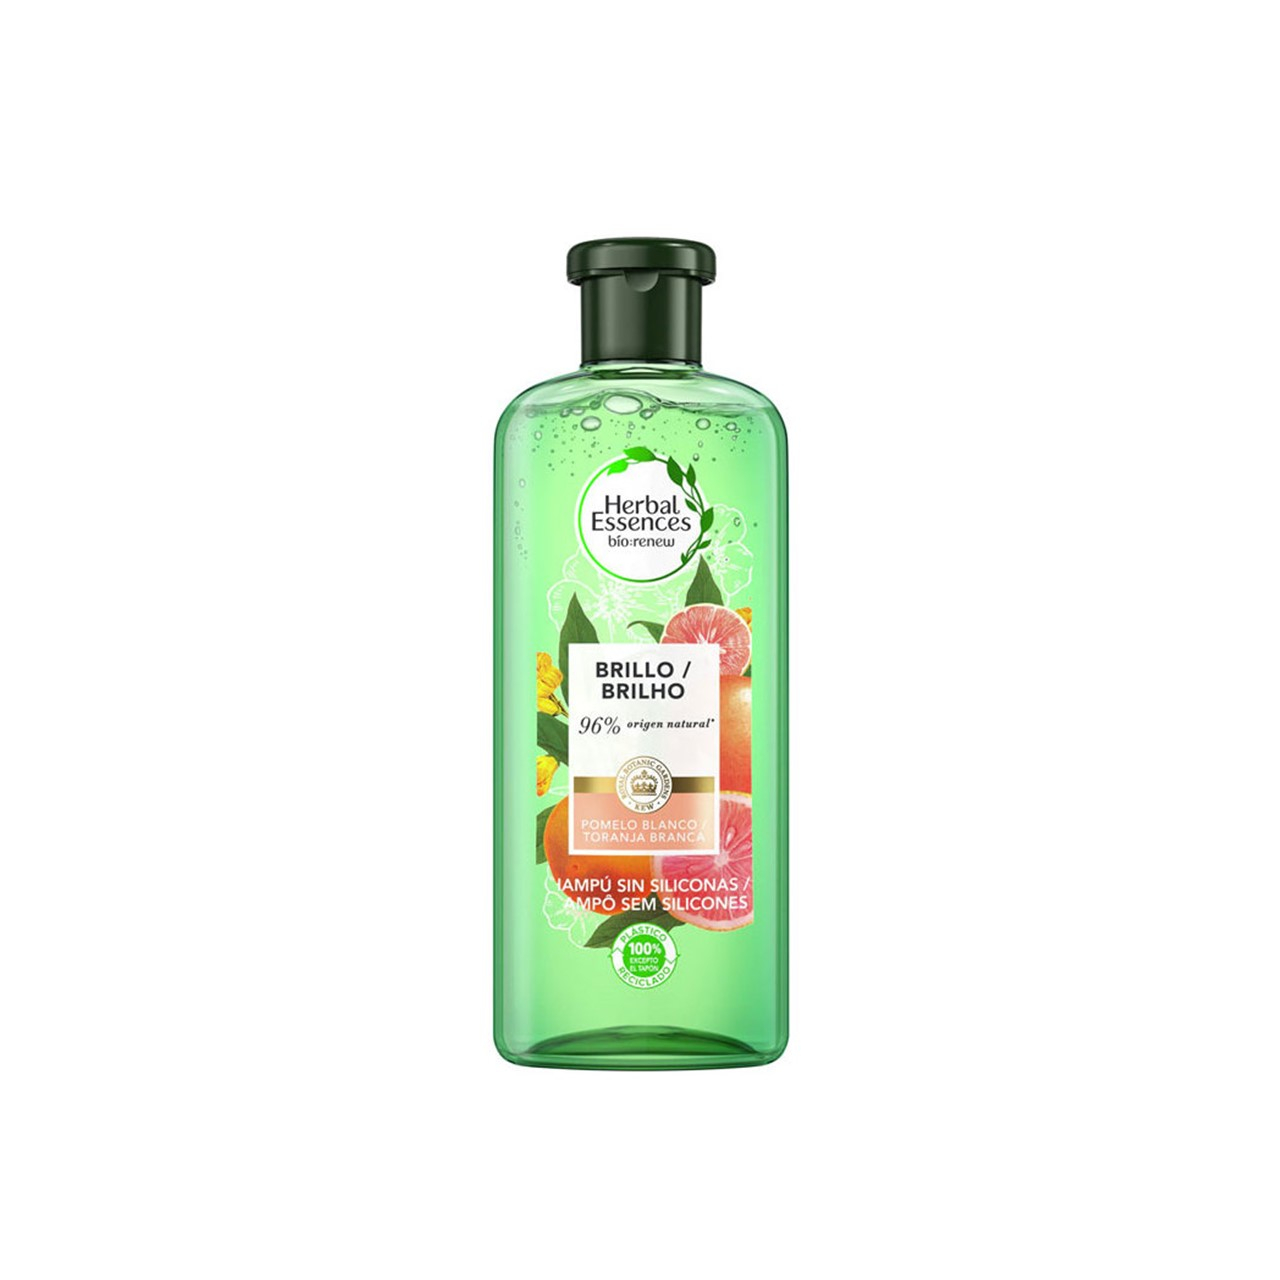 2 reviews for  can be seen online - Yuzu & Pomelo  Glossing Shampoo - Ecco Verde